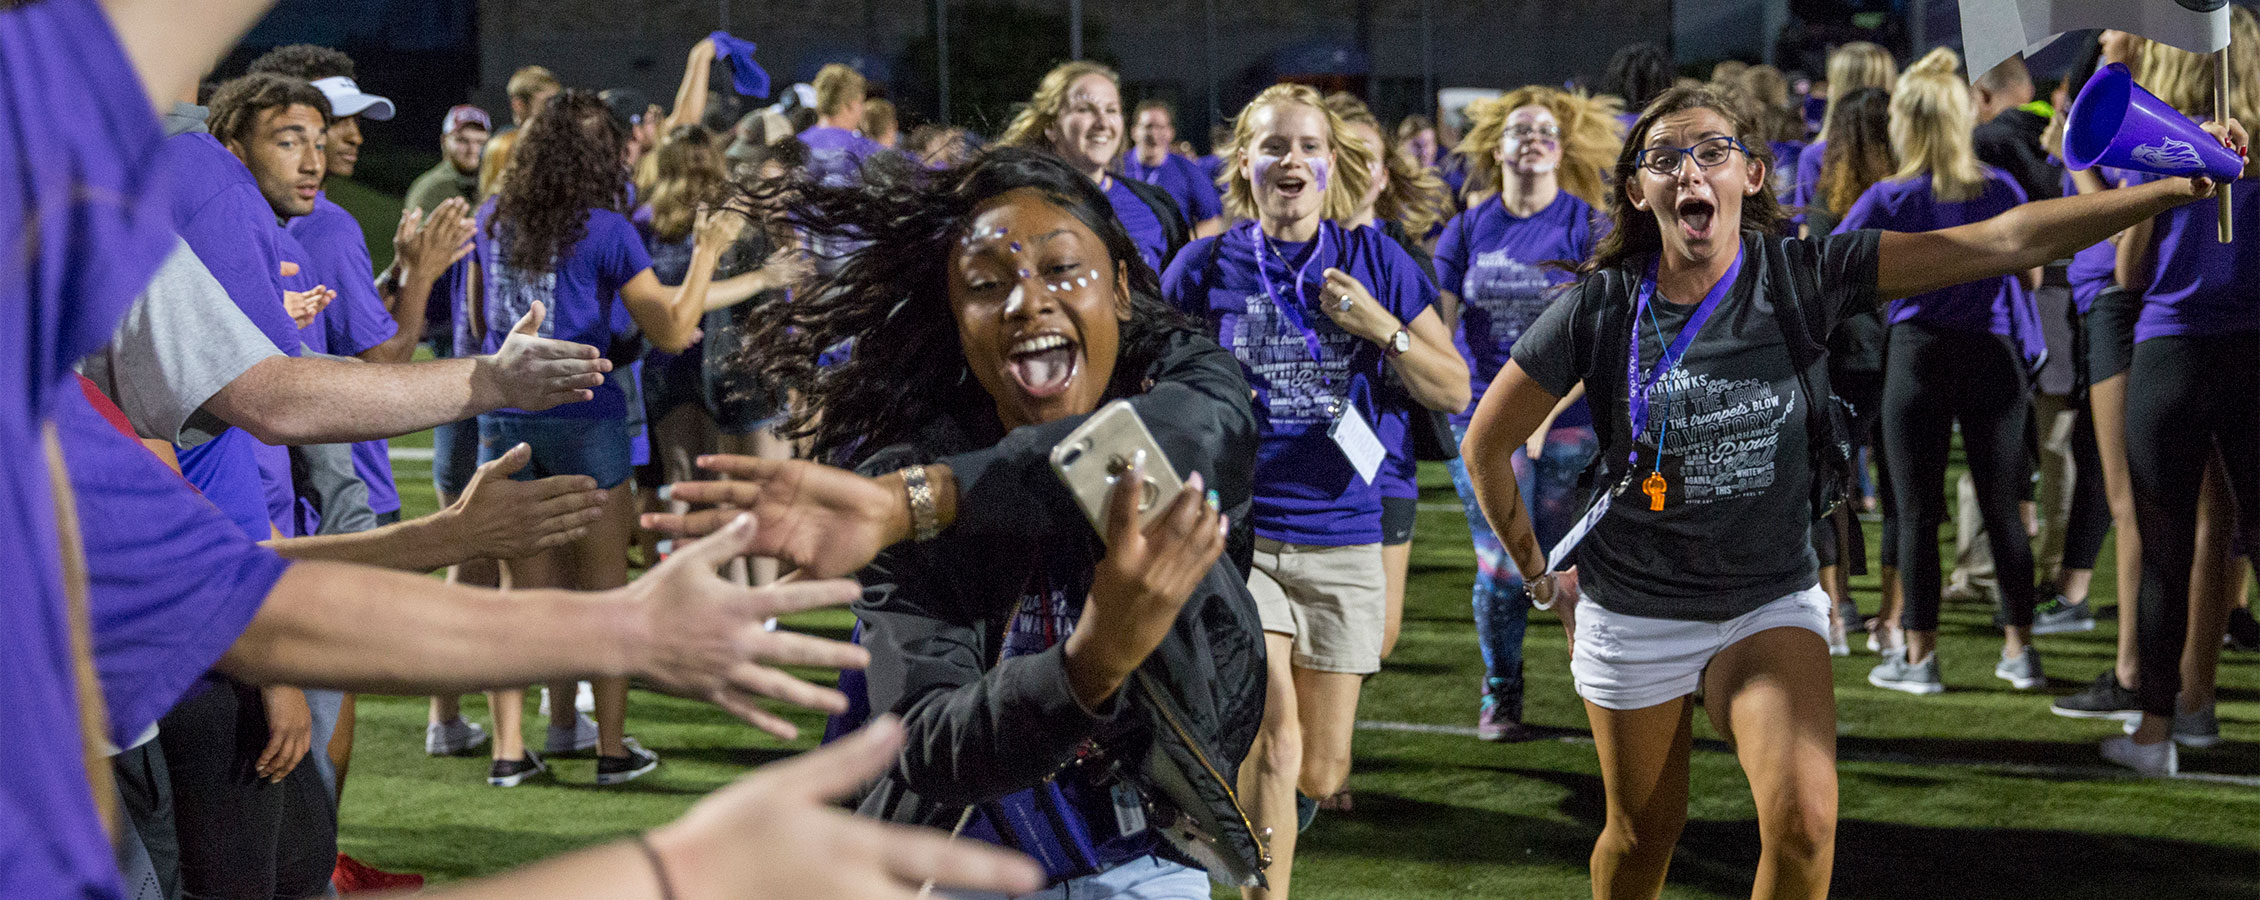  First-year students (freshman) & their peer mentors run through a human welcome tunnel of students & staff.